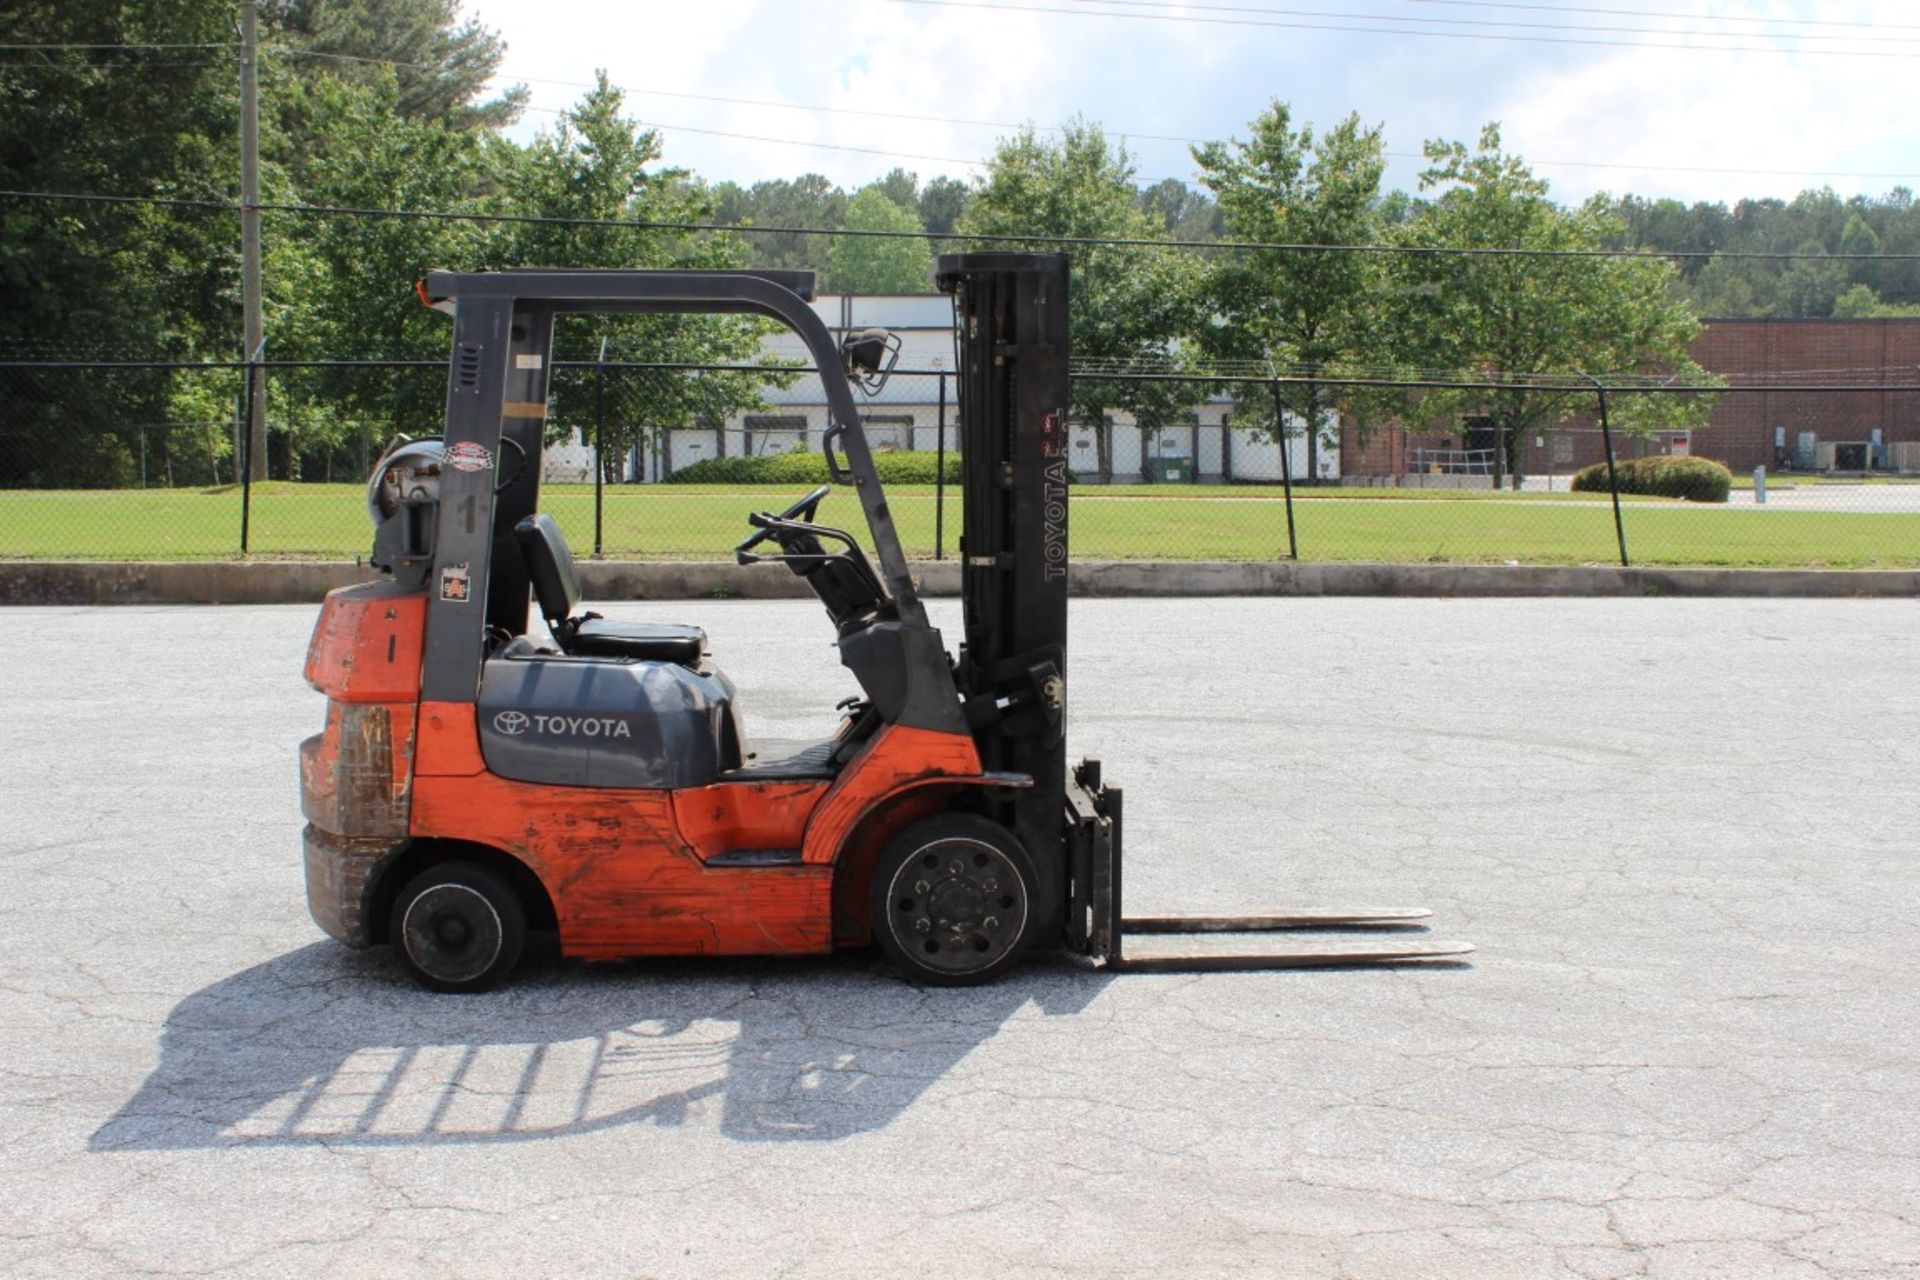 2001 TOYOTA 7FGCU25 PROPANE FORKLIFT, CLICK HERE TO WATCH VIDEO - Image 2 of 7